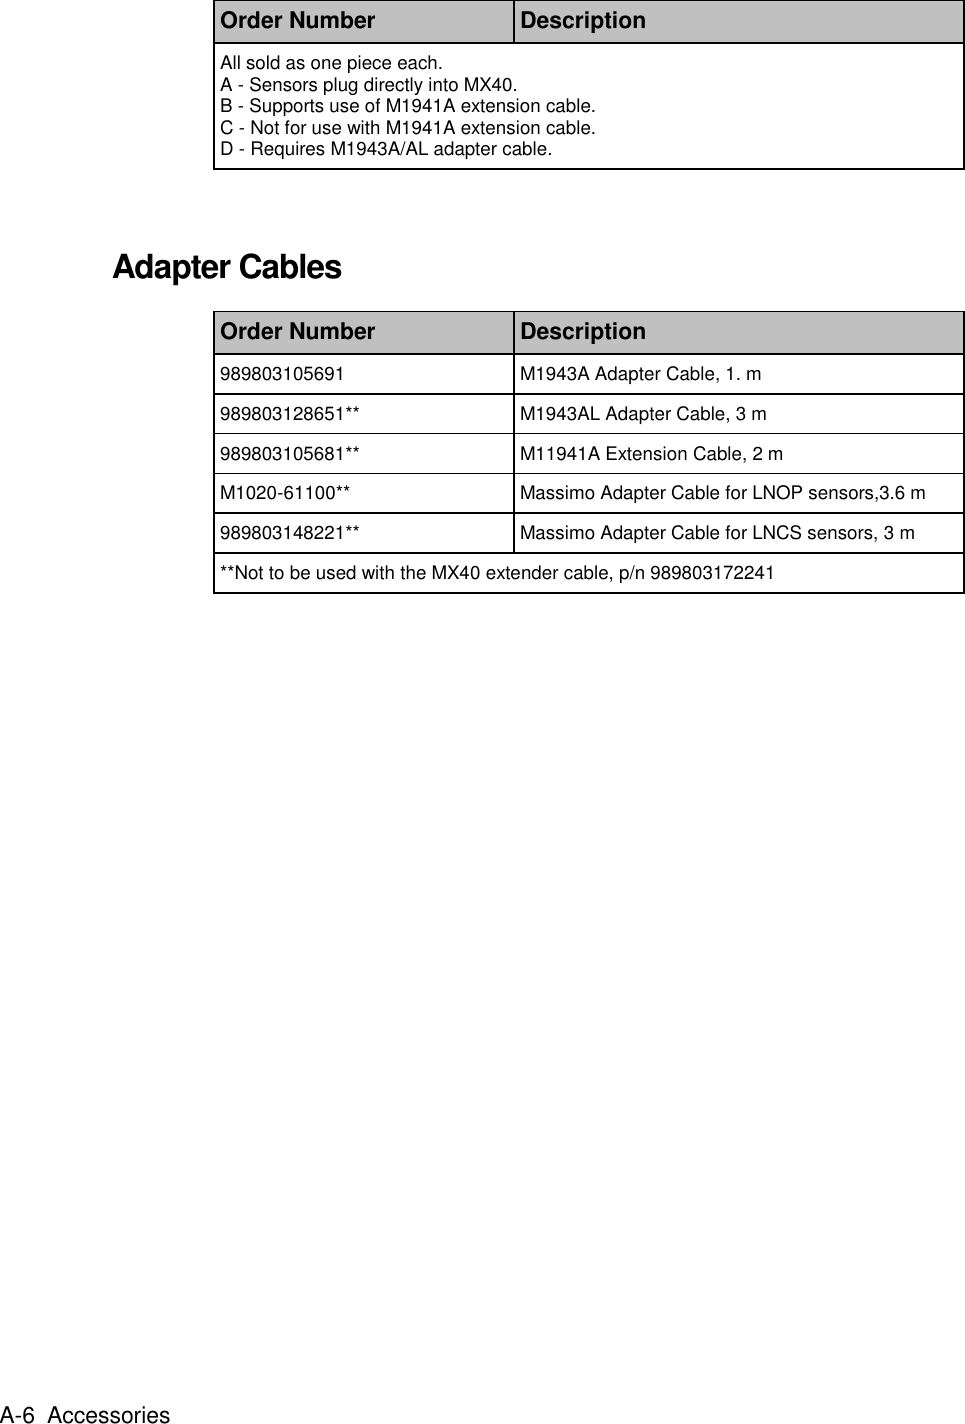  A-6   Accessories Order Number Description All sold as one piece each.   A - Sensors plug directly into MX40. B - Supports use of M1941A extension cable. C - Not for use with M1941A extension cable. D - Requires M1943A/AL adapter cable.   Adapter Cables Order Number Description 989803105691 M1943A Adapter Cable, 1. m 989803128651** M1943AL Adapter Cable, 3 m 989803105681** M11941A Extension Cable, 2 m M1020-61100** Massimo Adapter Cable for LNOP sensors,3.6 m 989803148221** Massimo Adapter Cable for LNCS sensors, 3 m **Not to be used with the MX40 extender cable, p/n 989803172241   